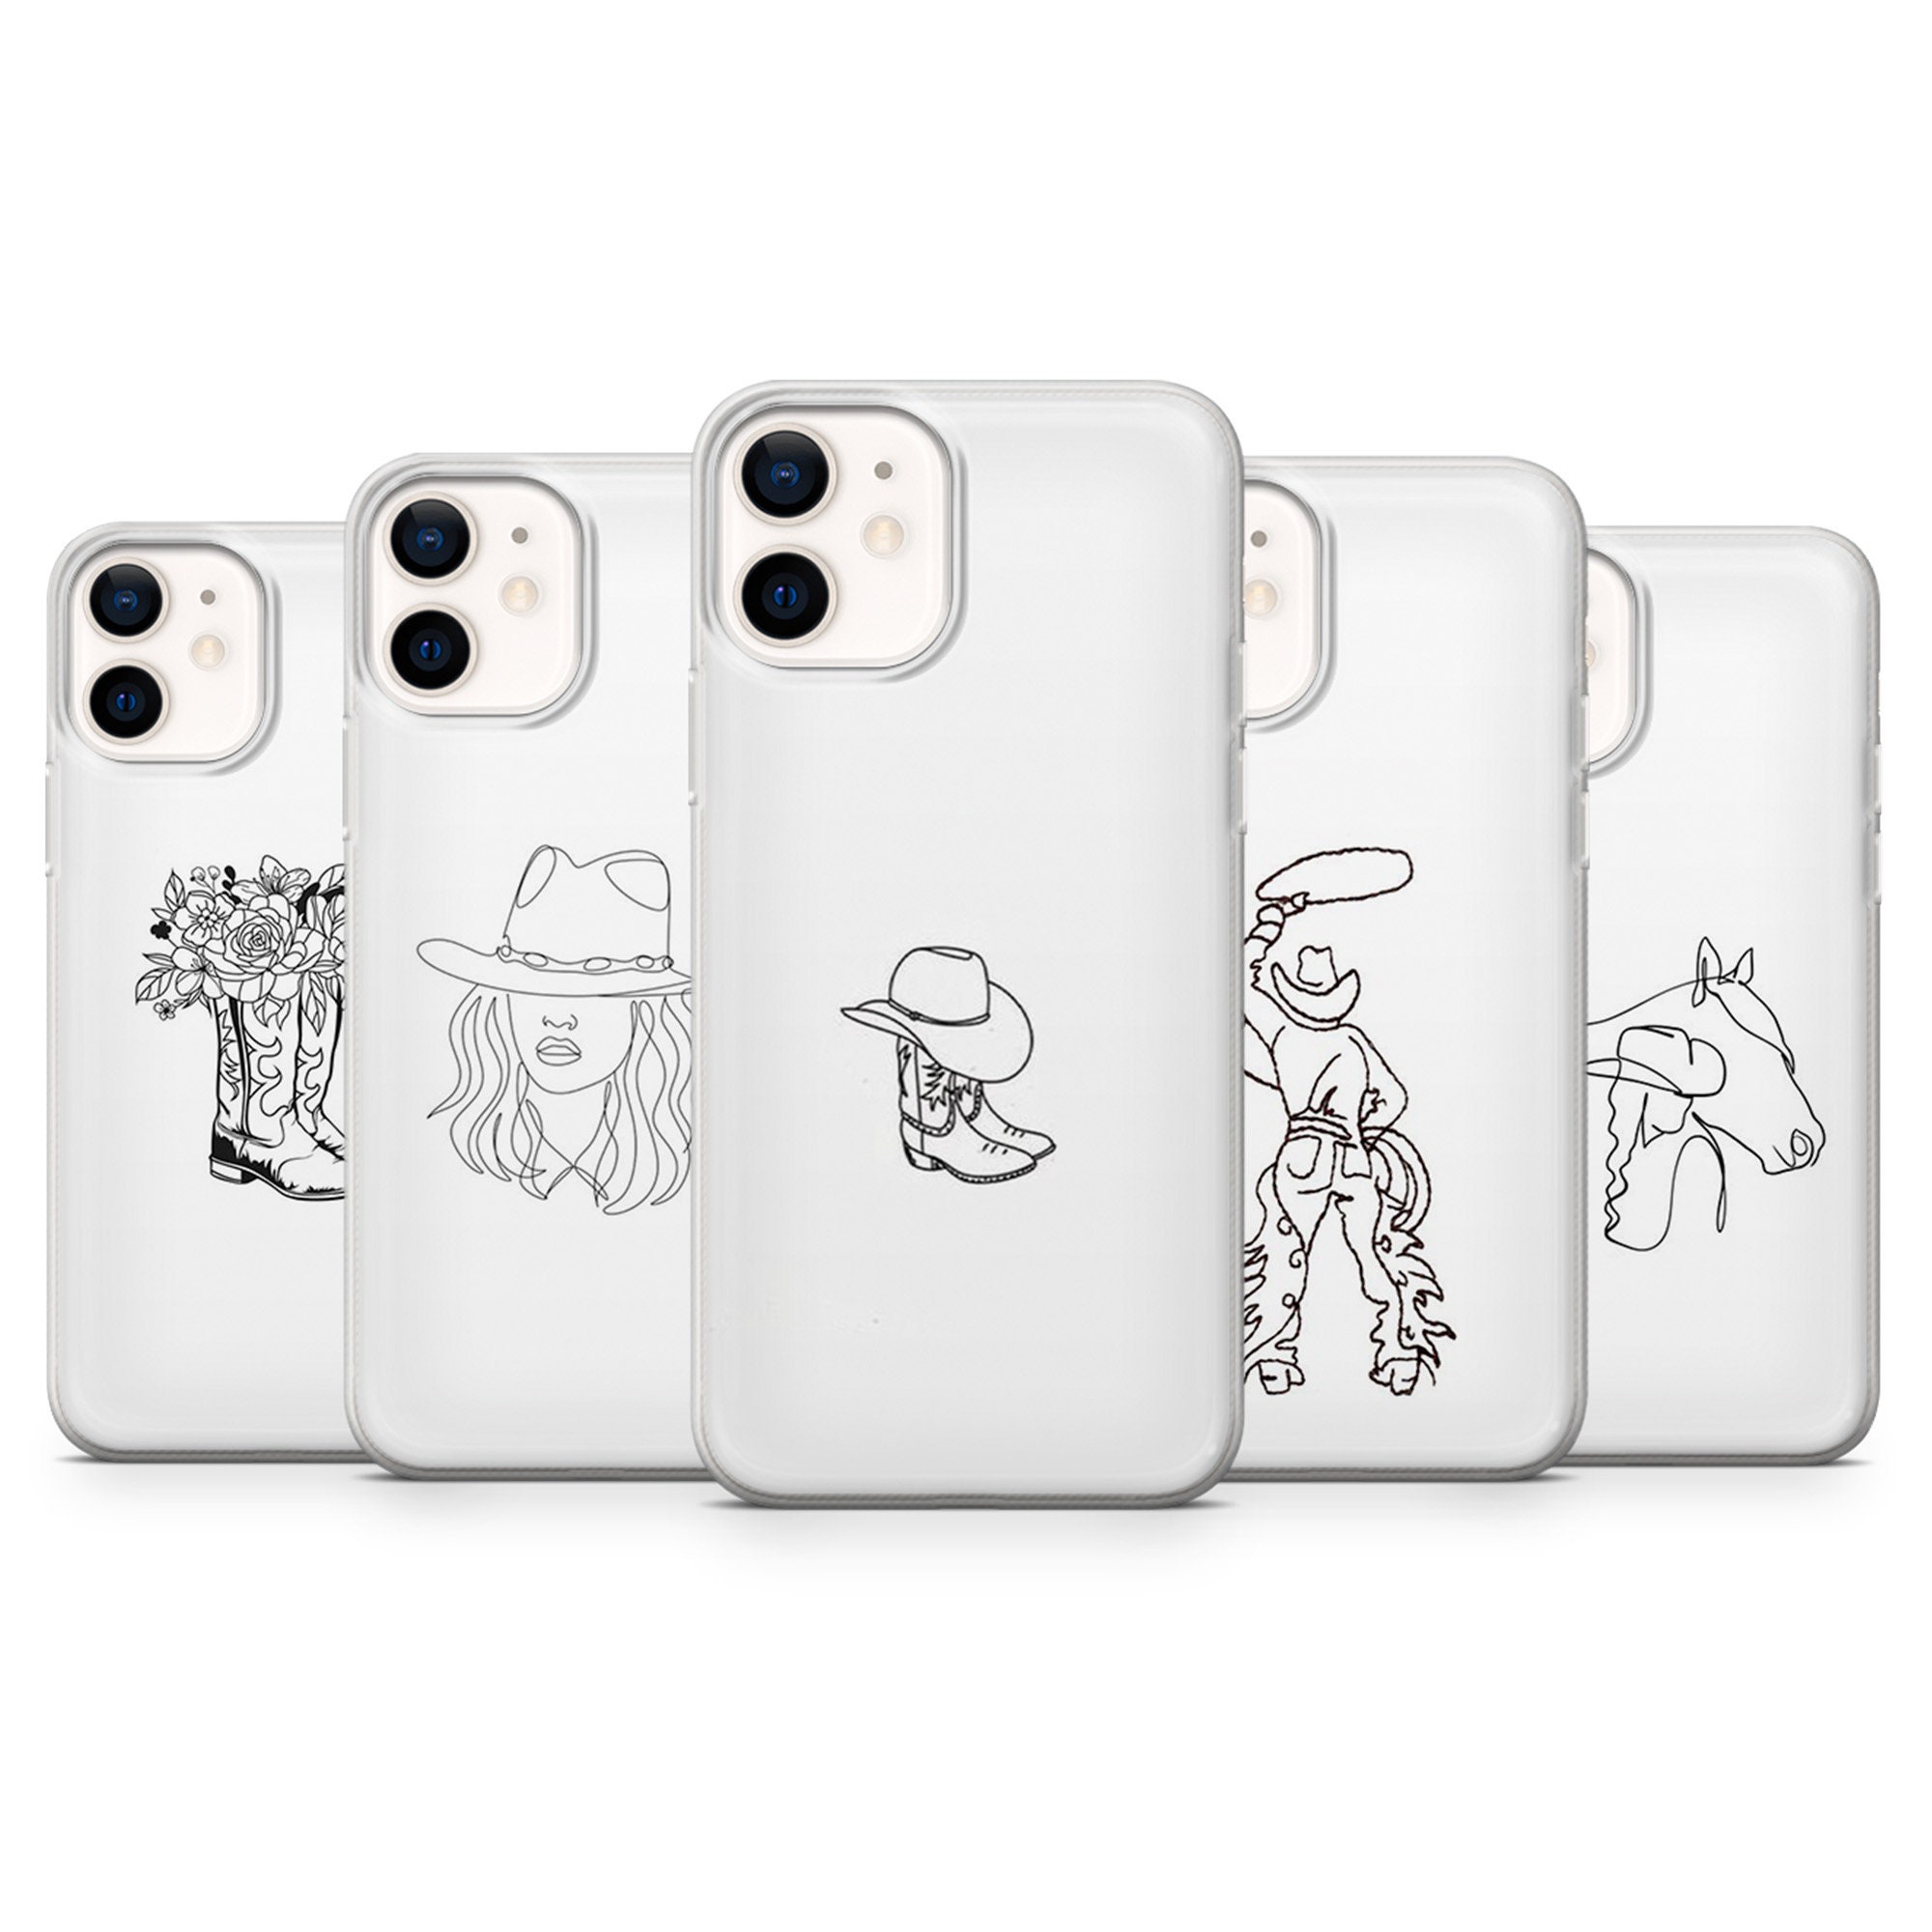  Galaxy S10 Minimal Female Lineart Simple Aesthetic Pencil Drawing  Case : Cell Phones & Accessories